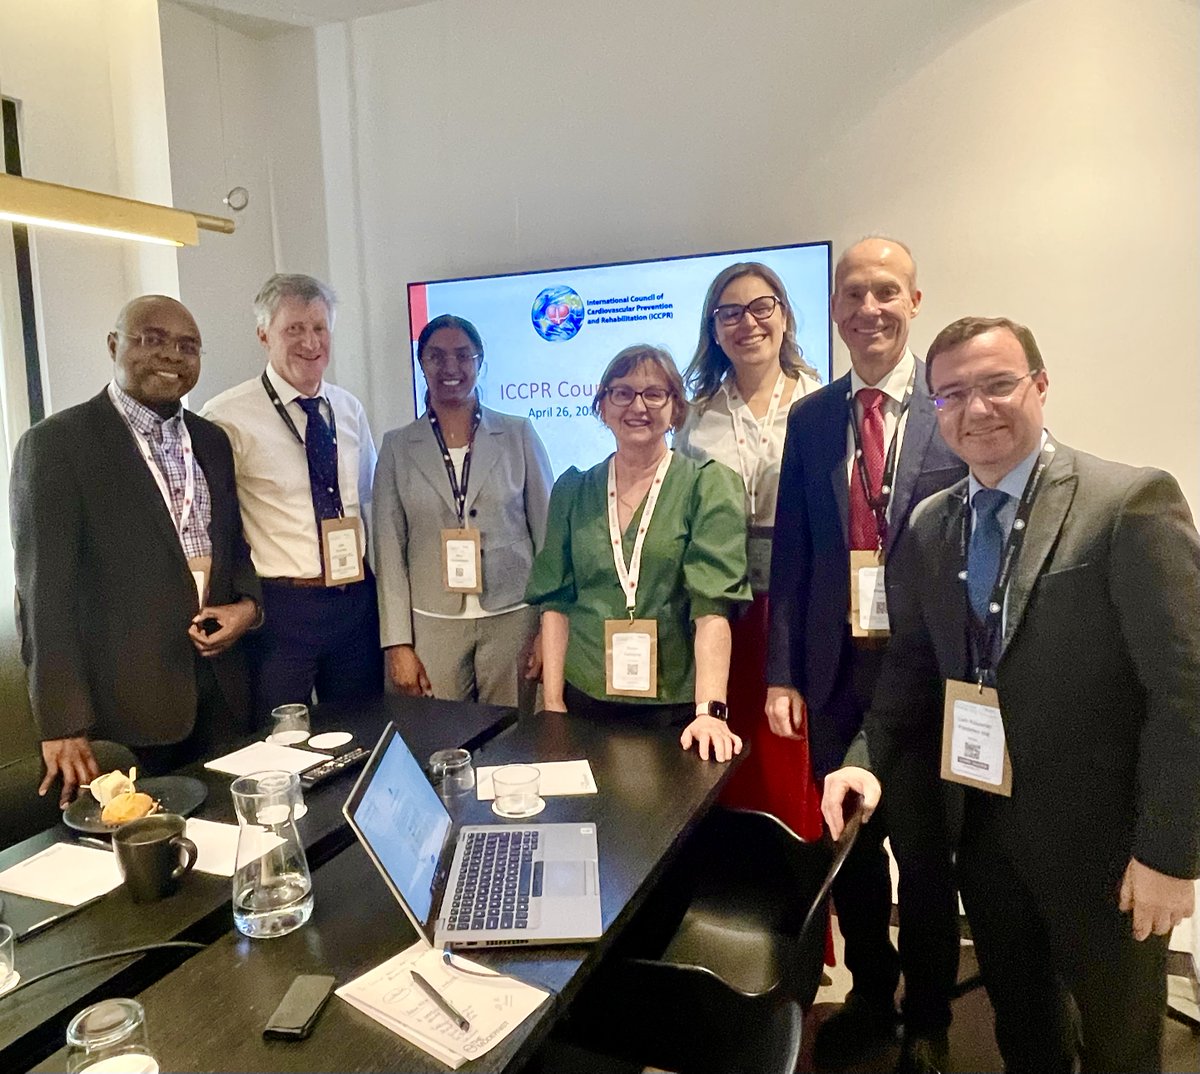 Just wrapped up our @ICCPR_GlobalCR council meeting this afternoon - hybrid style! It was wonderful to finally meet members in person and discuss our shared goals. Looking forward to more productive gatherings ahead! #letstalkICCPR